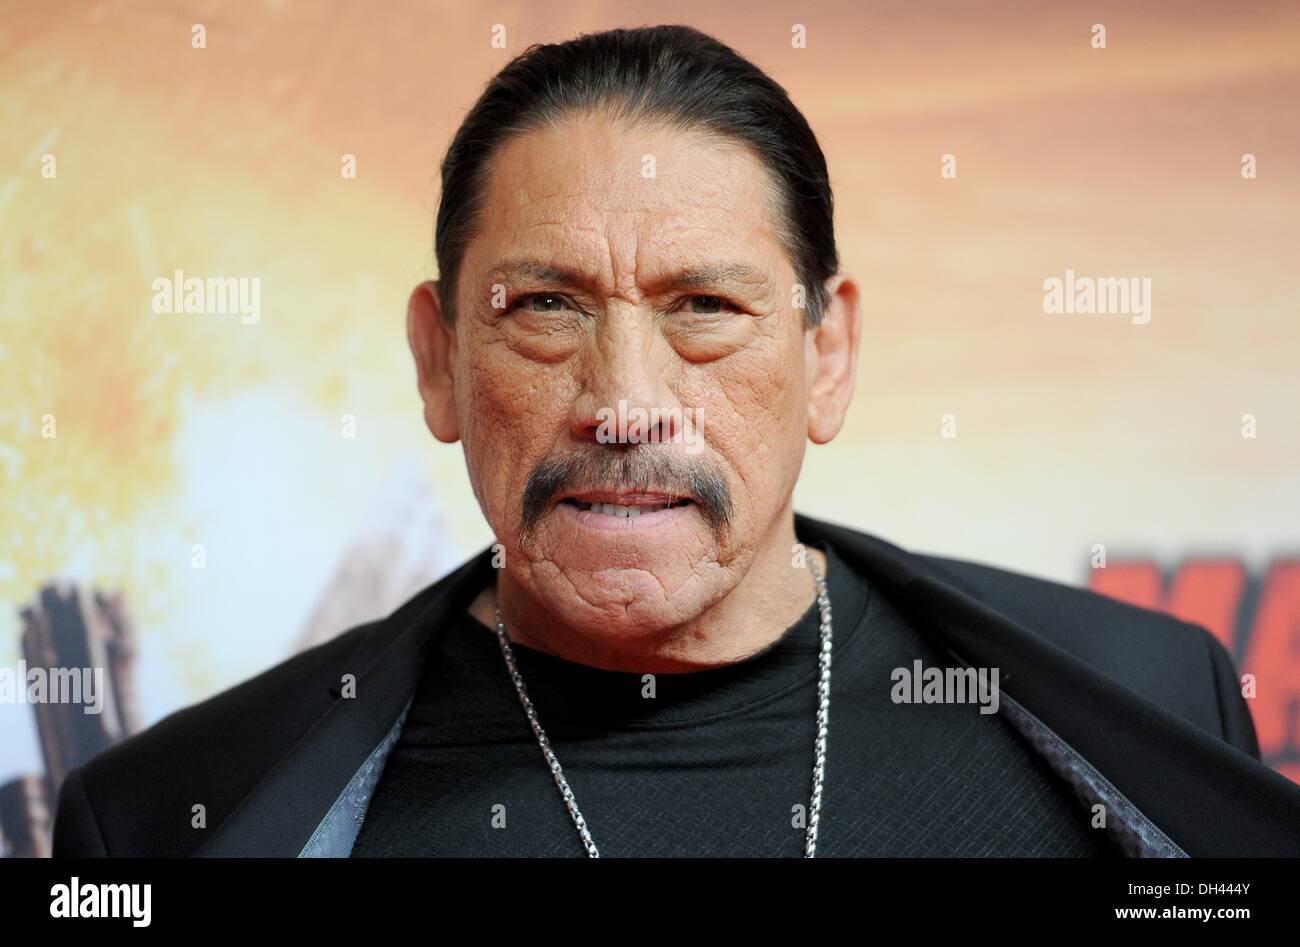 Berlin, Germany. 30th Oct, 2013. US actor/cast member Danny Trejo poses  prior the premiere of the movie 'Machete Kills' in Berlin, Germany, 30  October 2013. The film will be released across German